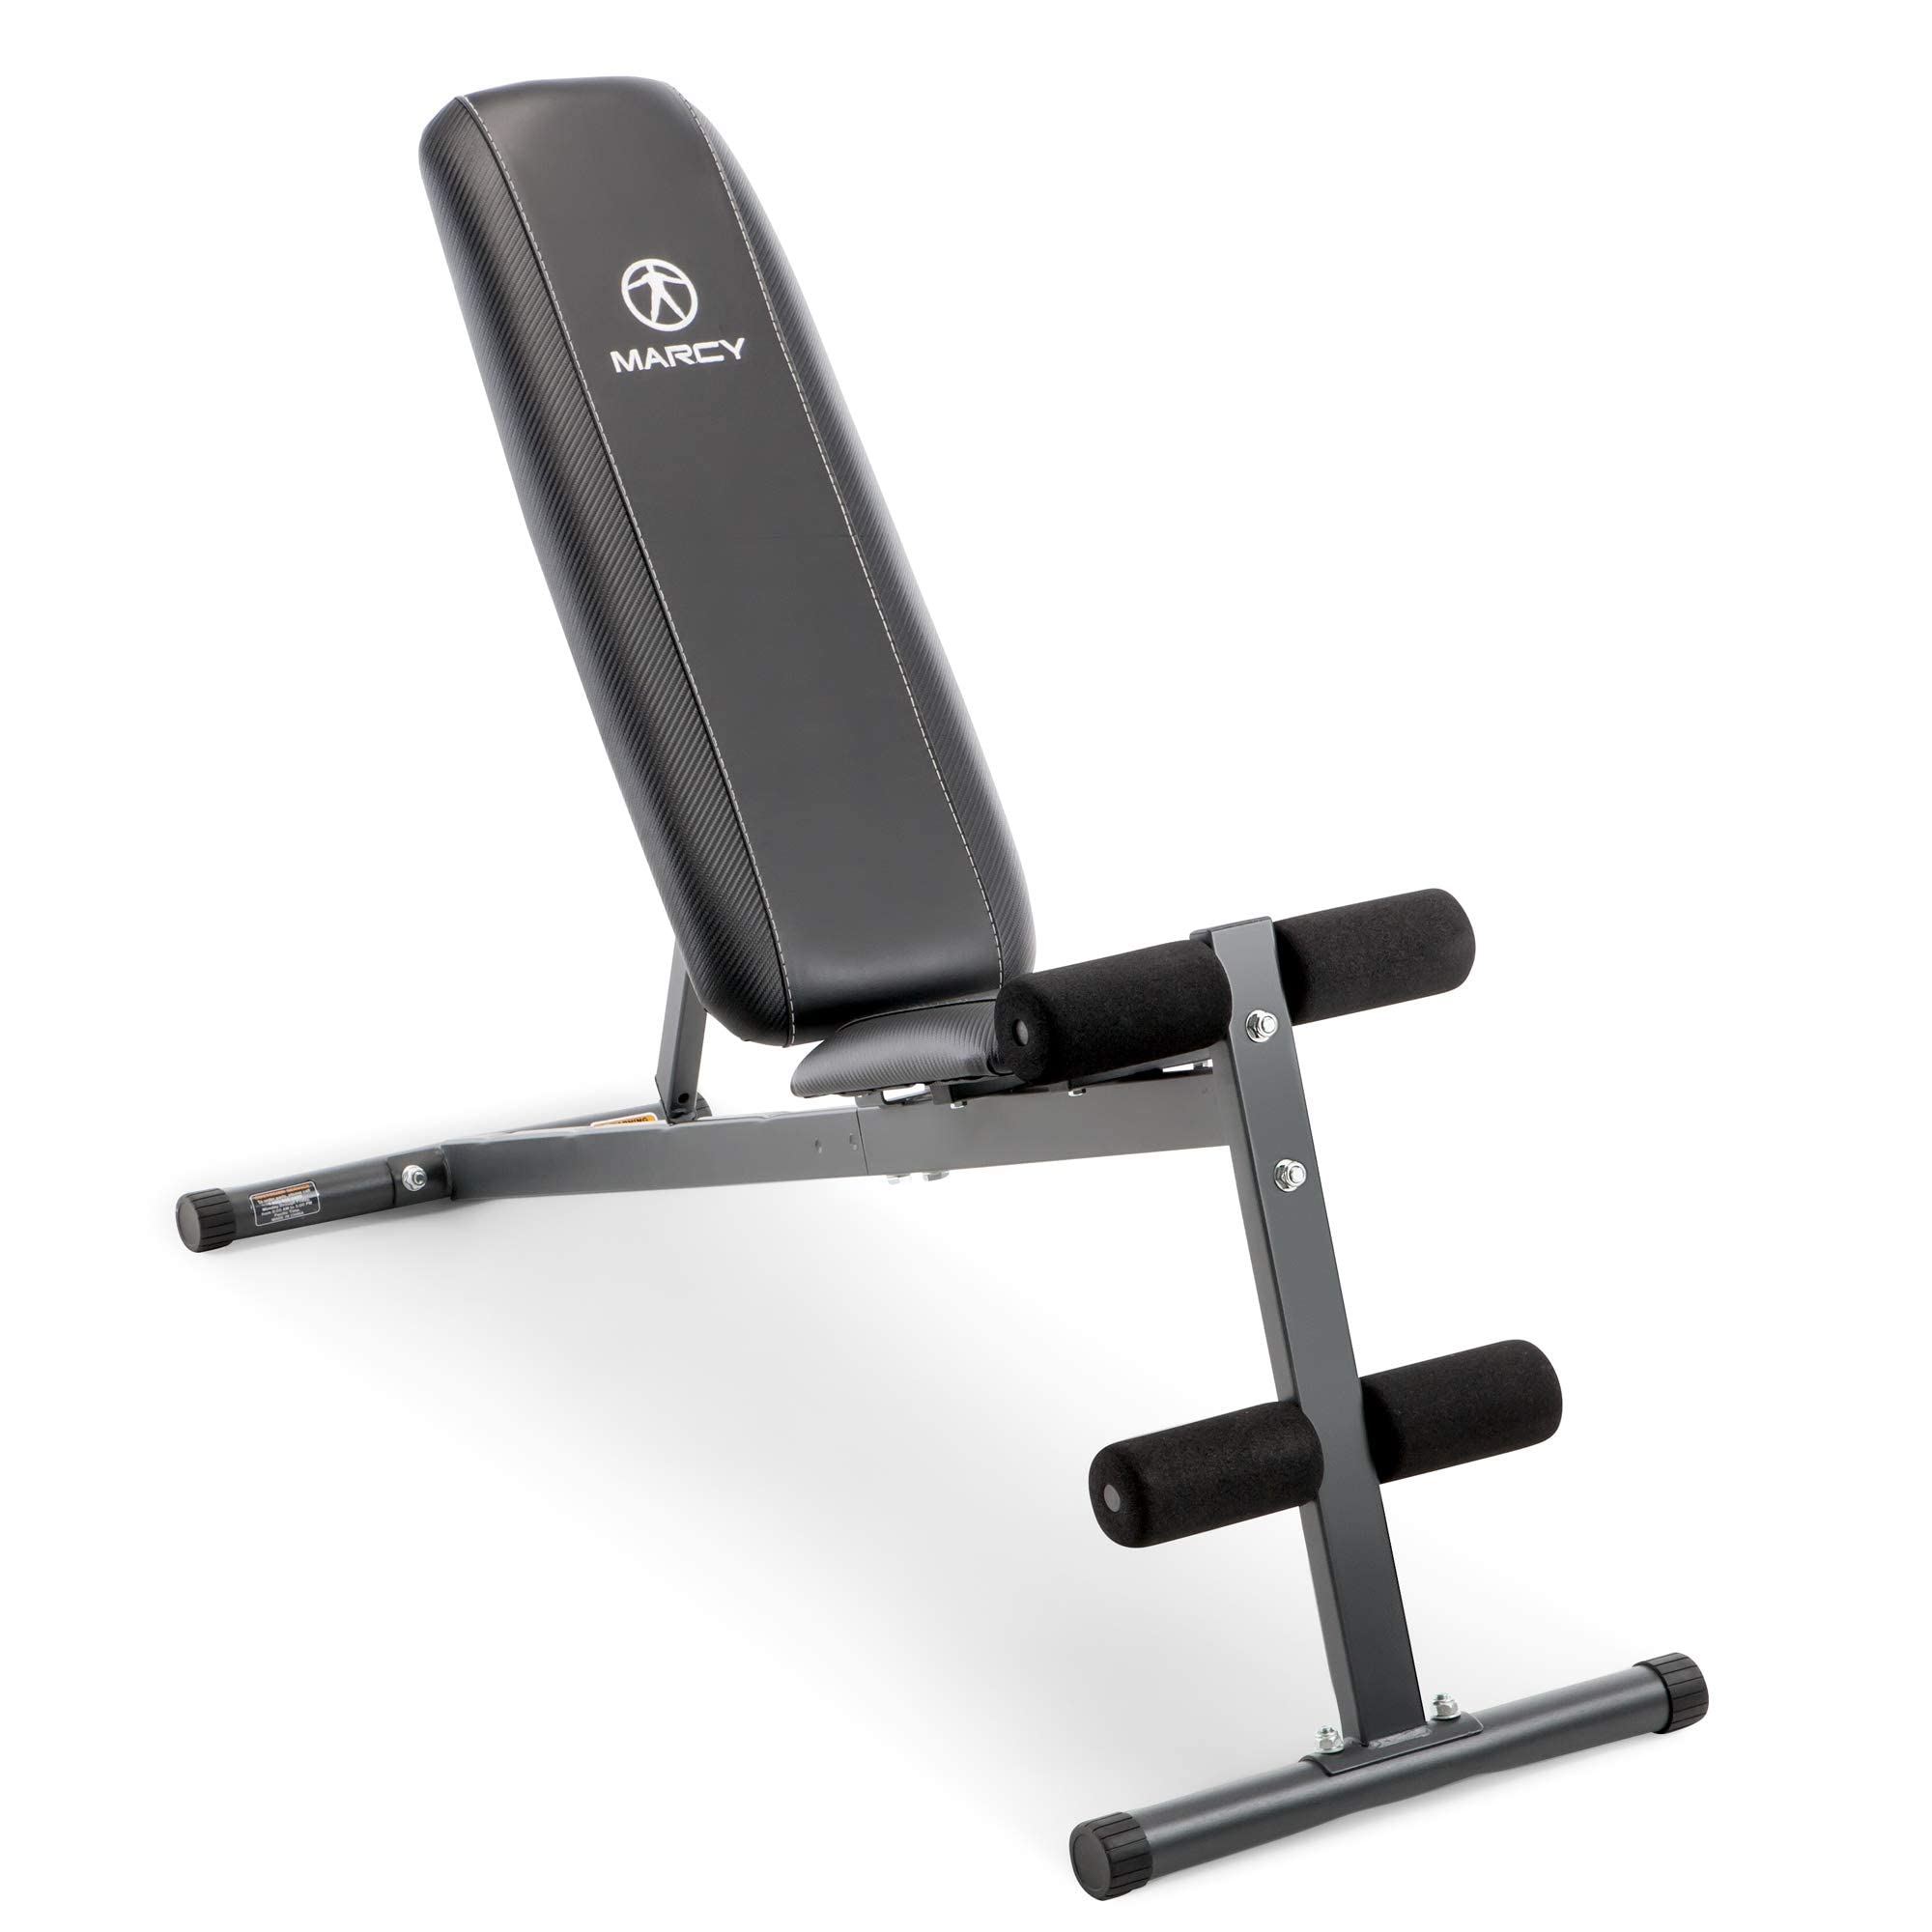 Marcy Exercise Utility Bench for Upright, Incline, Decline, and Flat Exercise SB-261W , Black